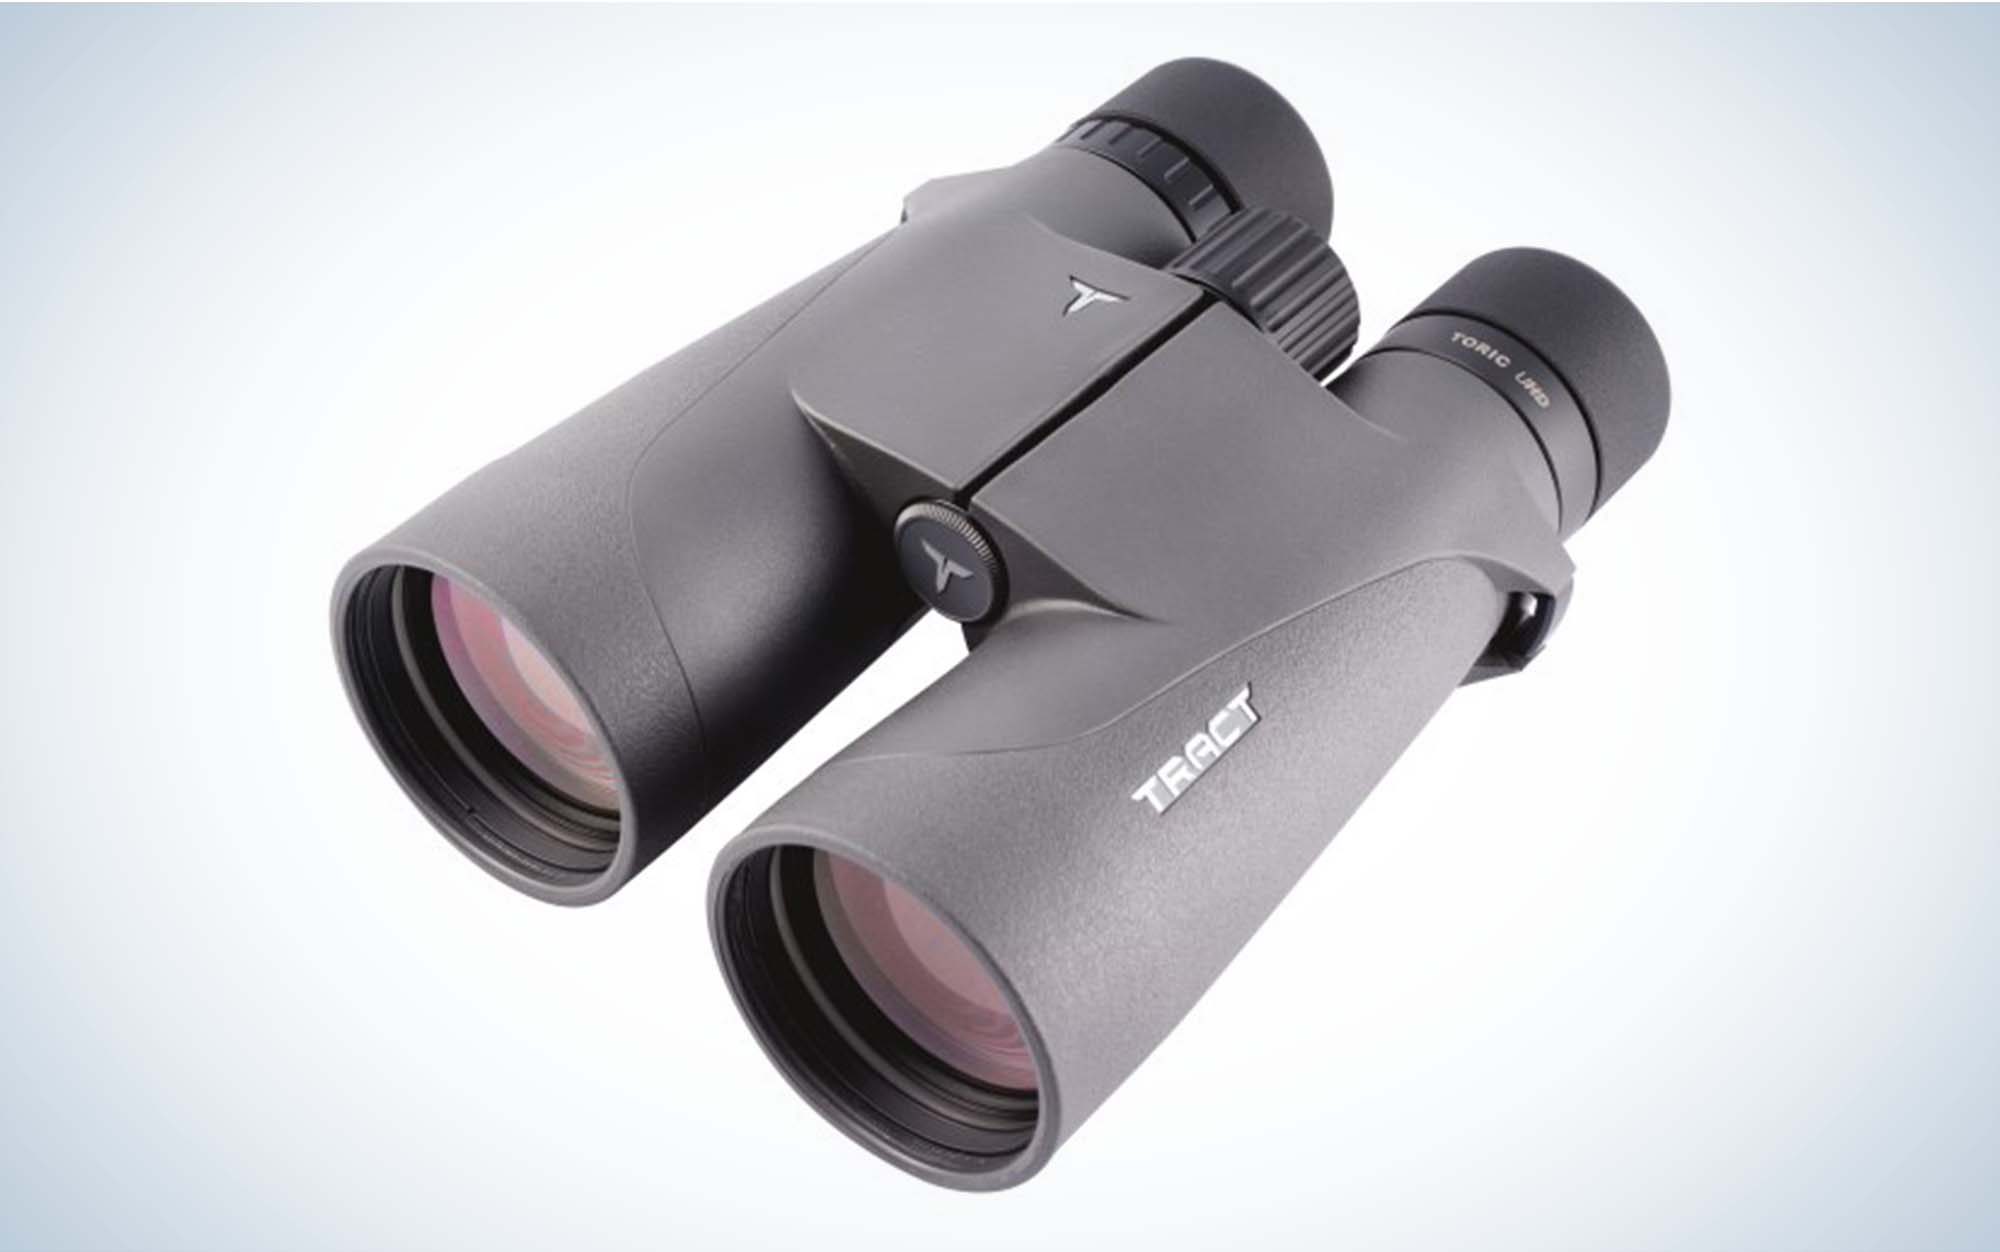 The Tract Toric UHD 15x56 are the best binoculars for tripod glassing.